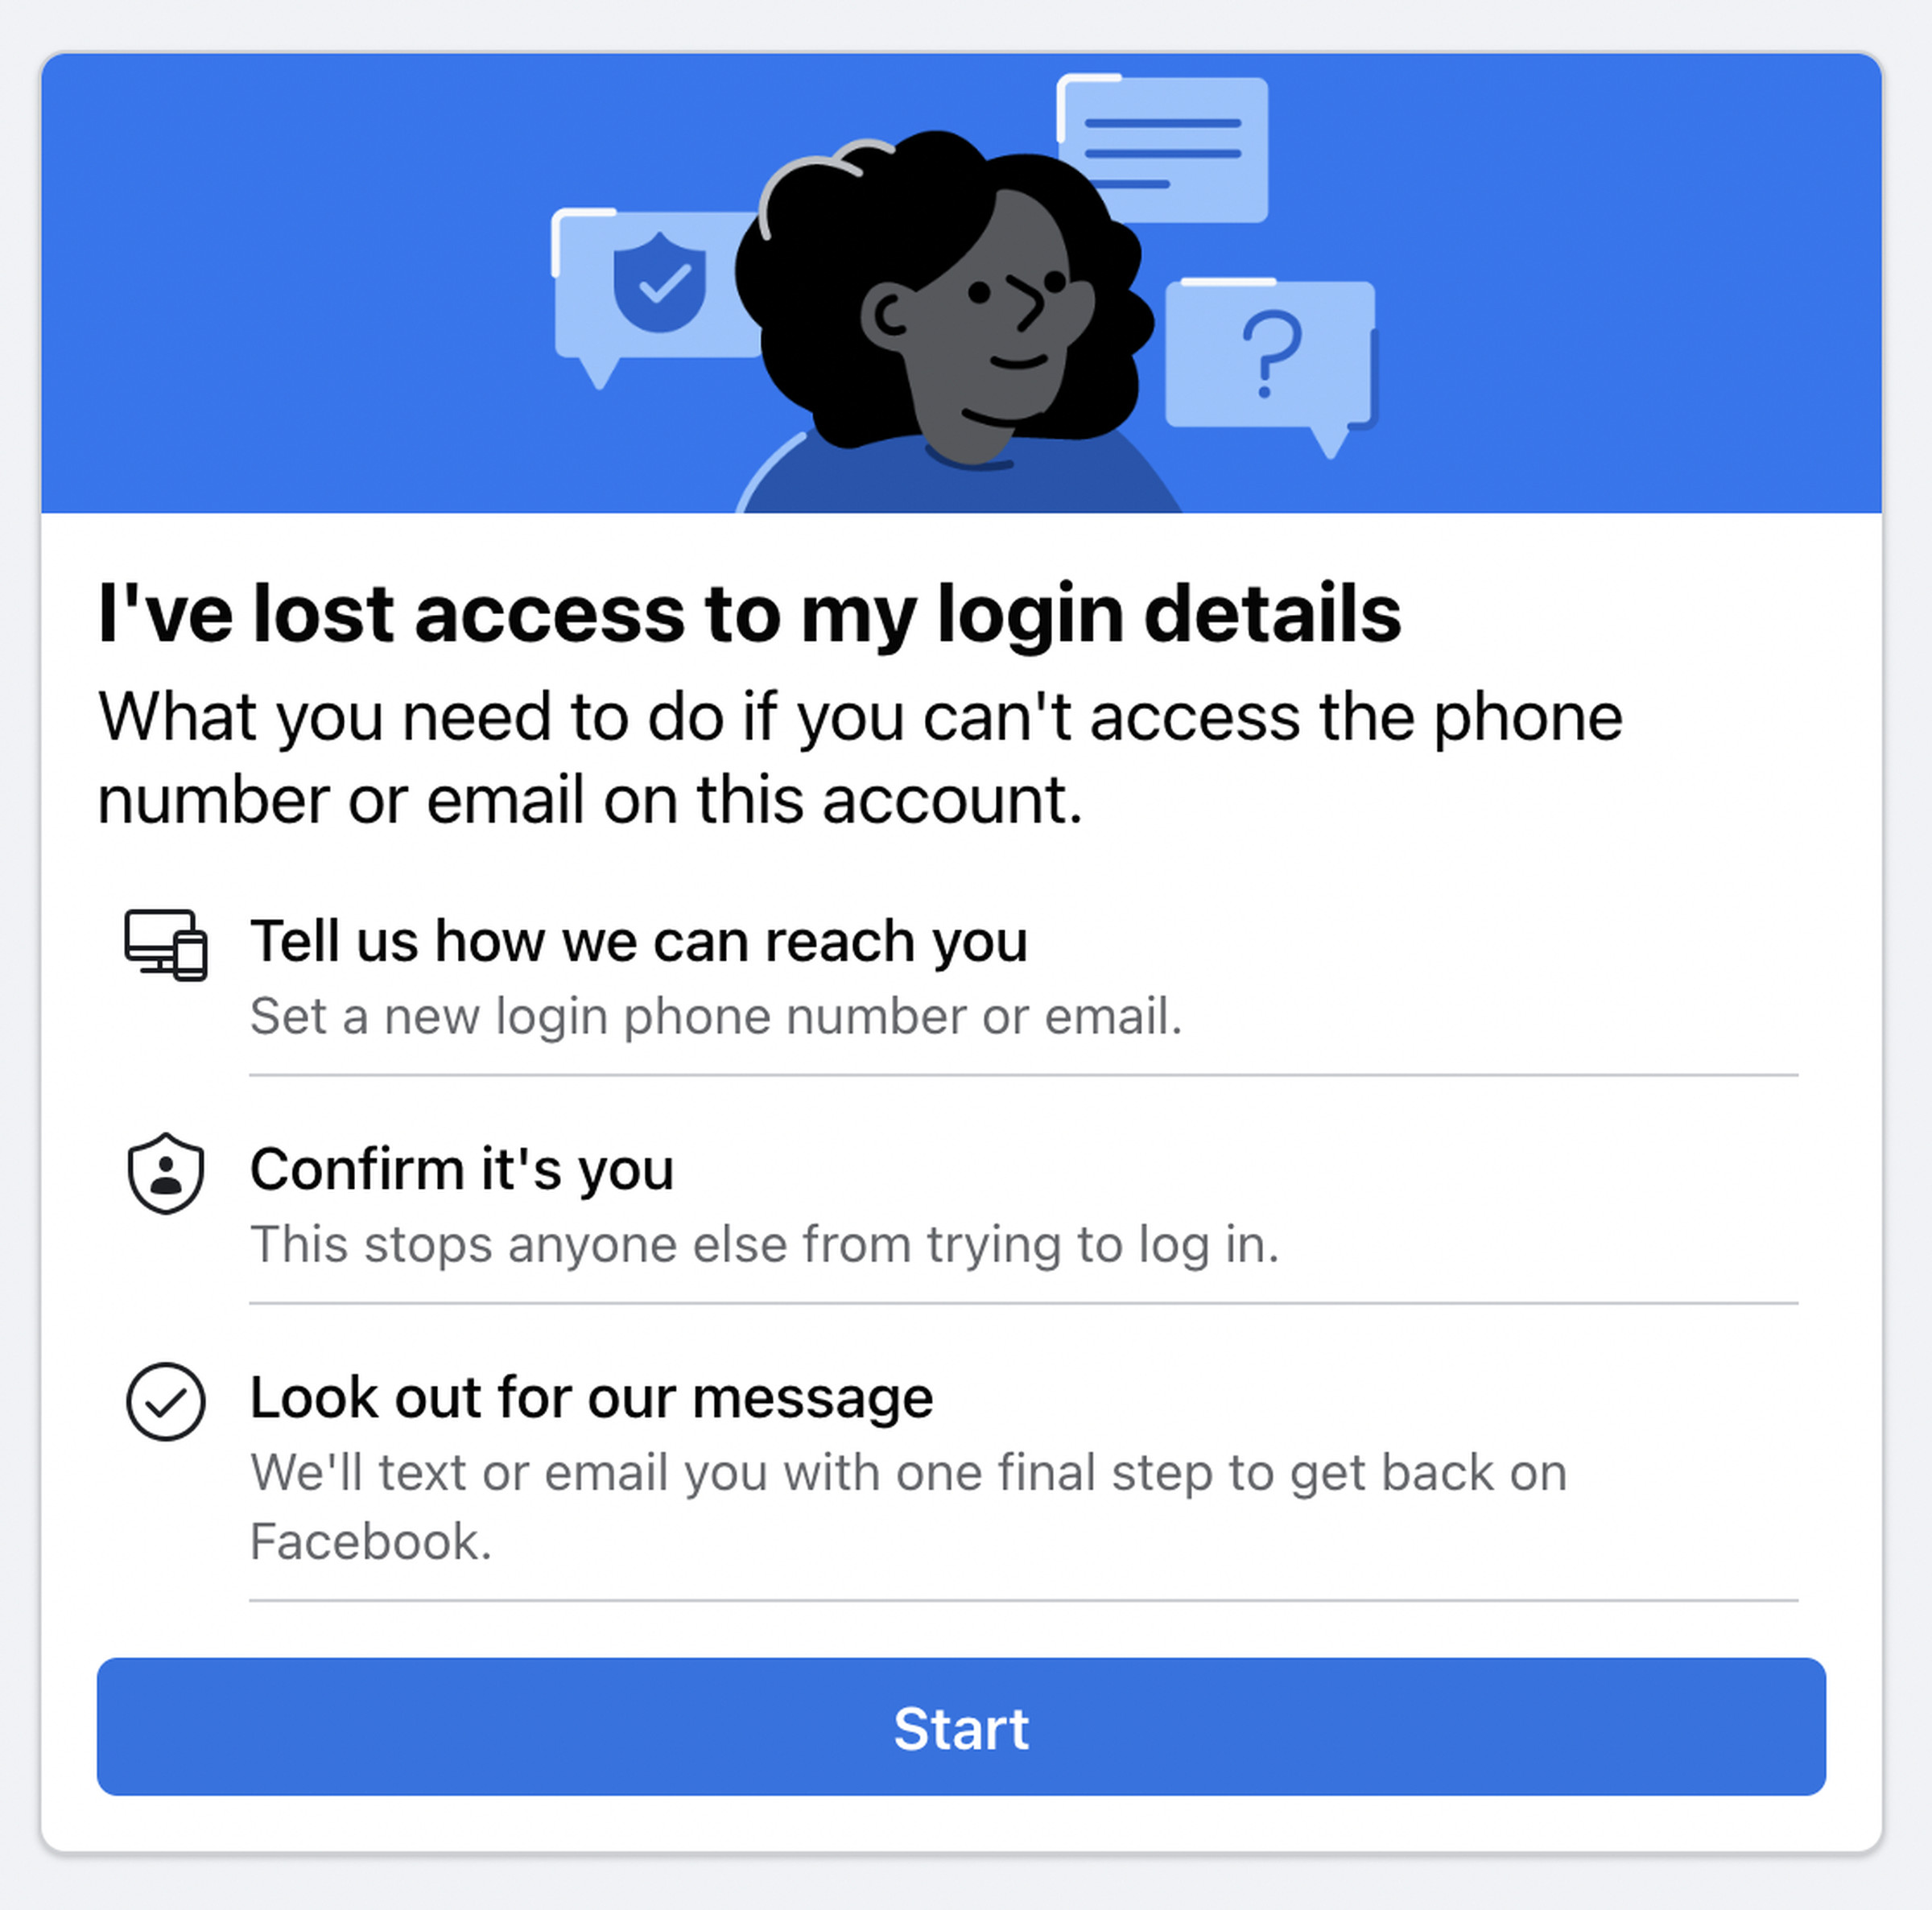 If you can’t log in, Facebook will present you with a set of alternative identifiers to help lock down your account.